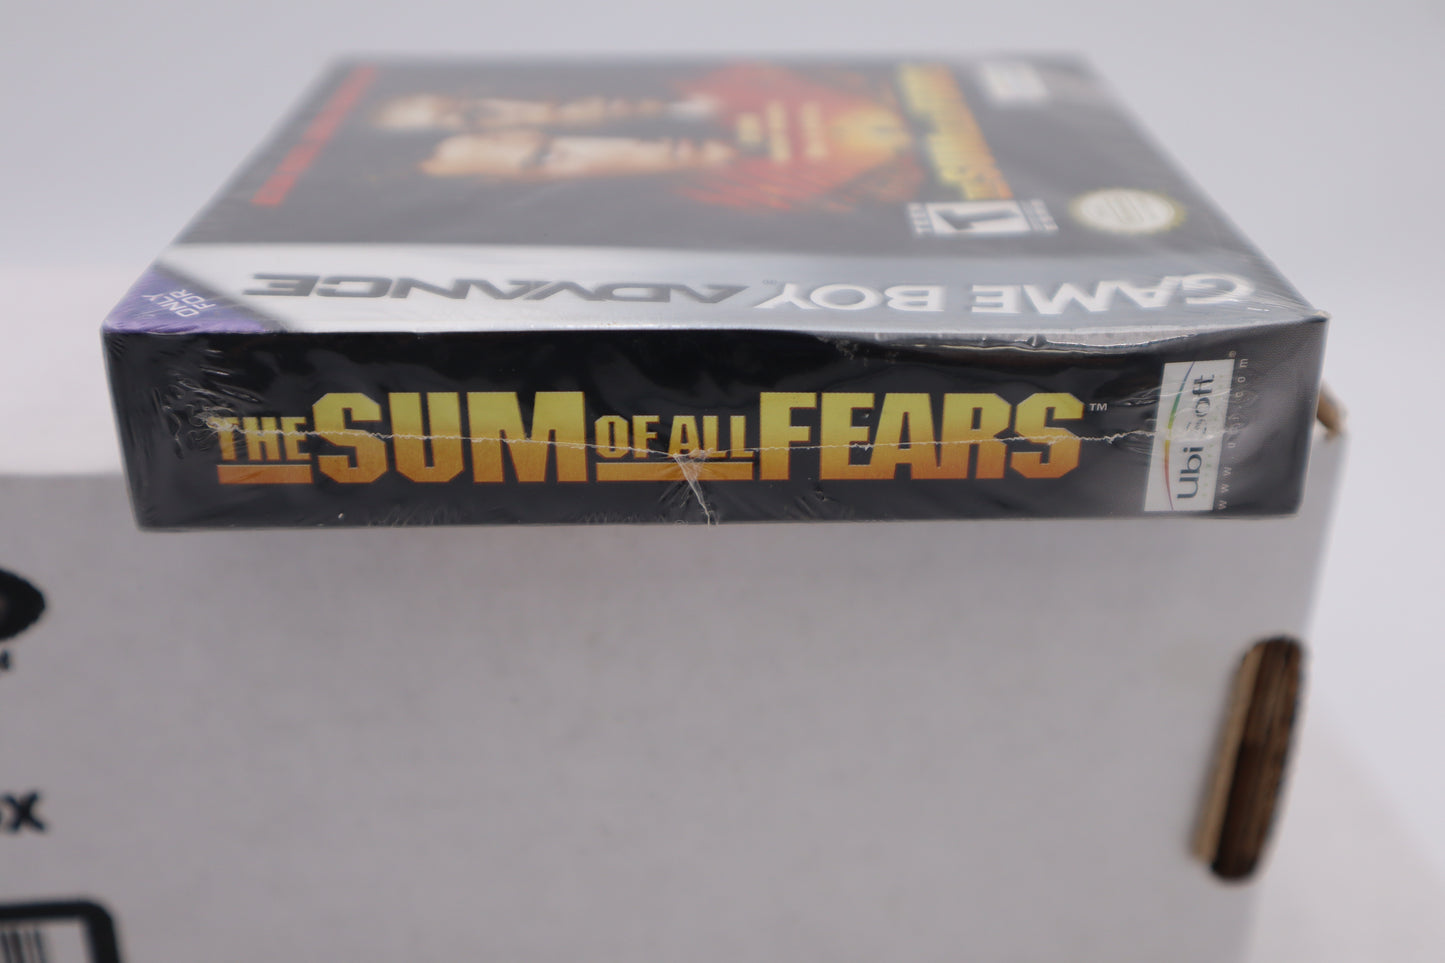 Sum of All Fears - GameBoy Advance (6916973035575)